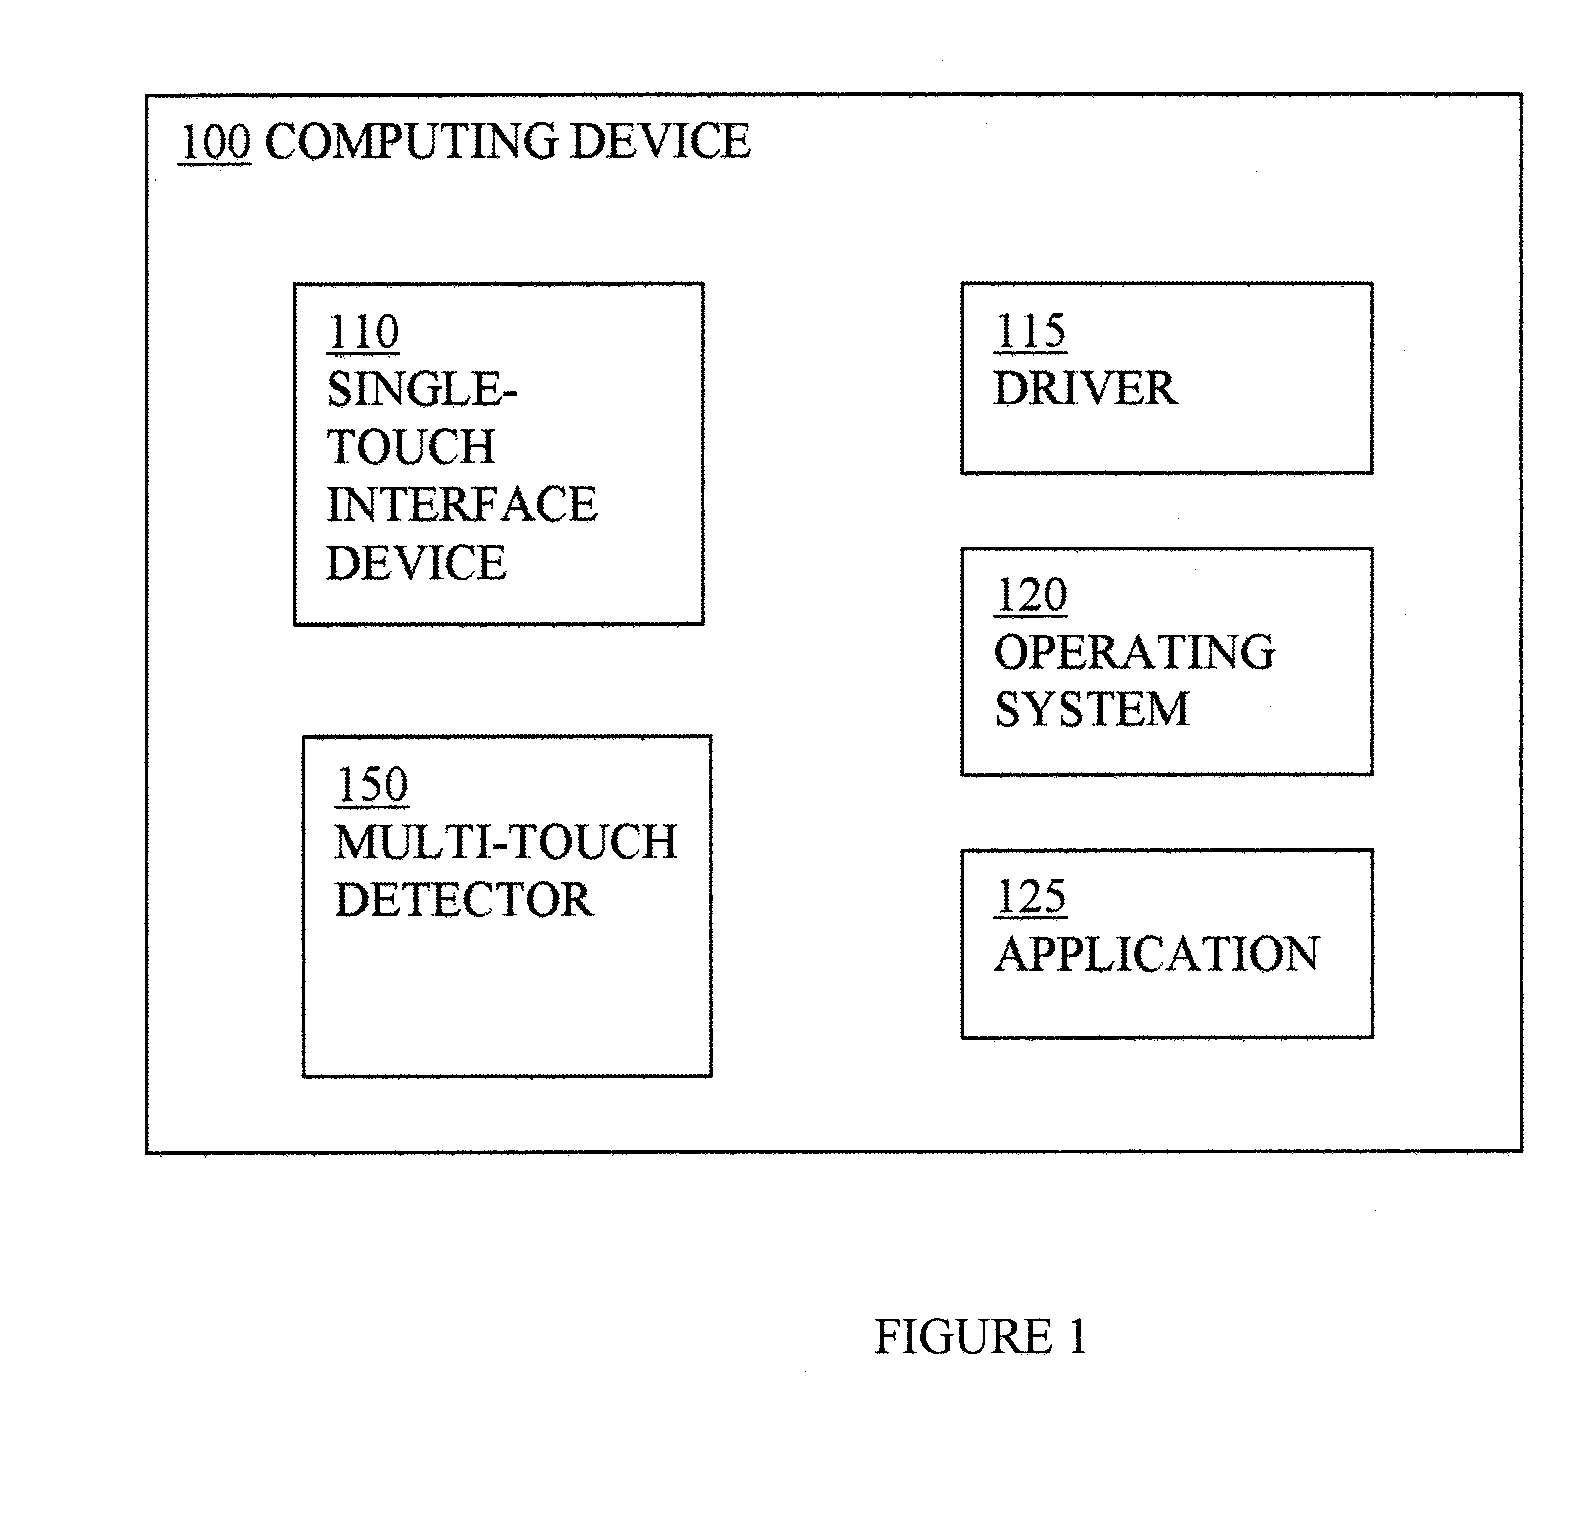 Apparatus and method for providing multi-touch interface capability